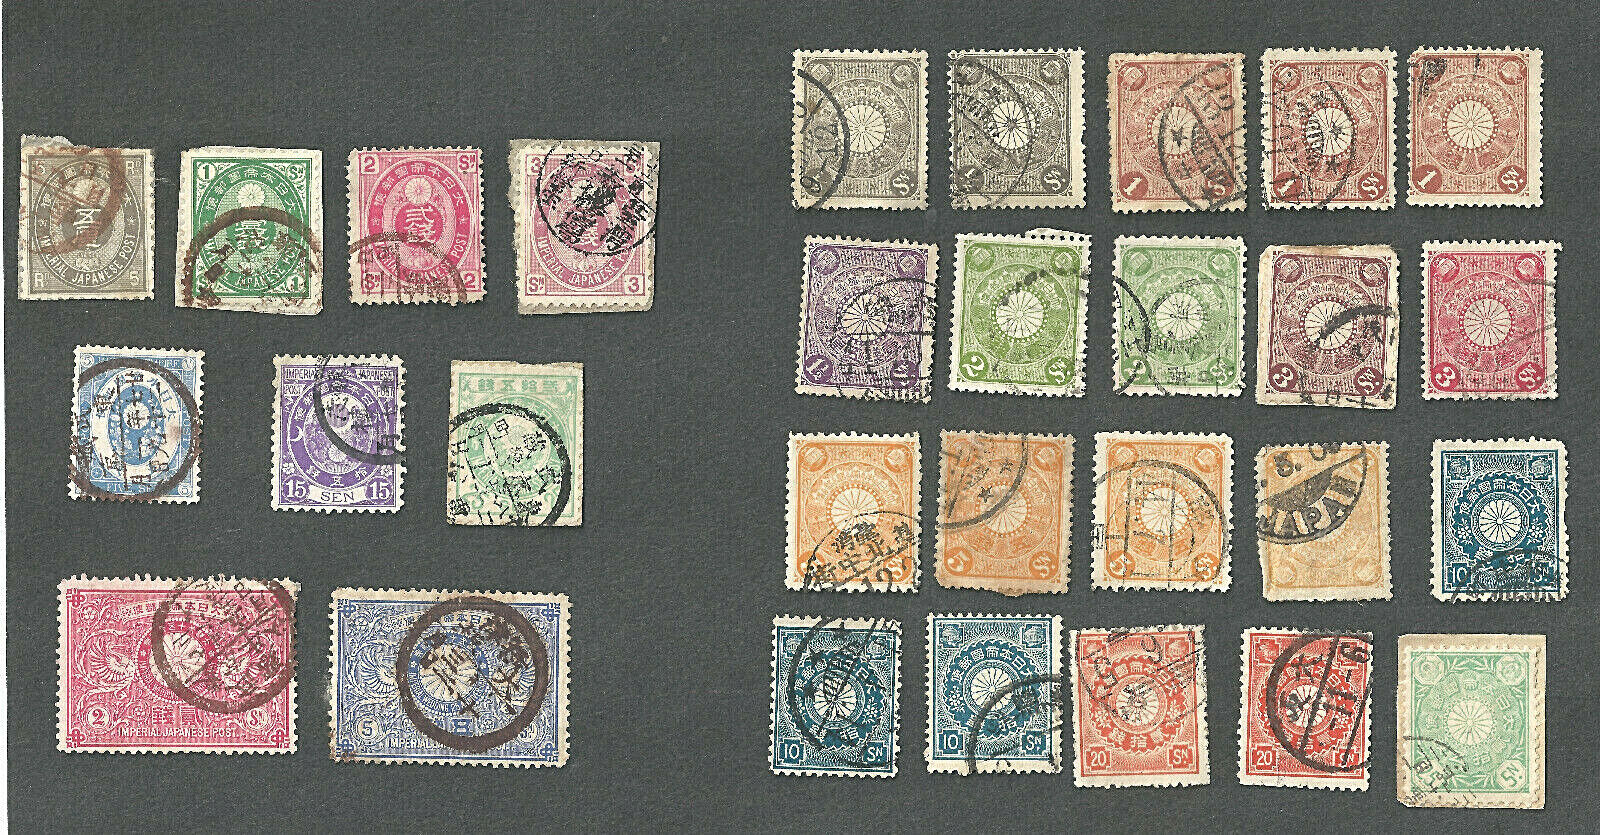 Japan Small Nice Collection Kobans Chrysanthemums Some Nice Cancel Marks  Used  Без бренда